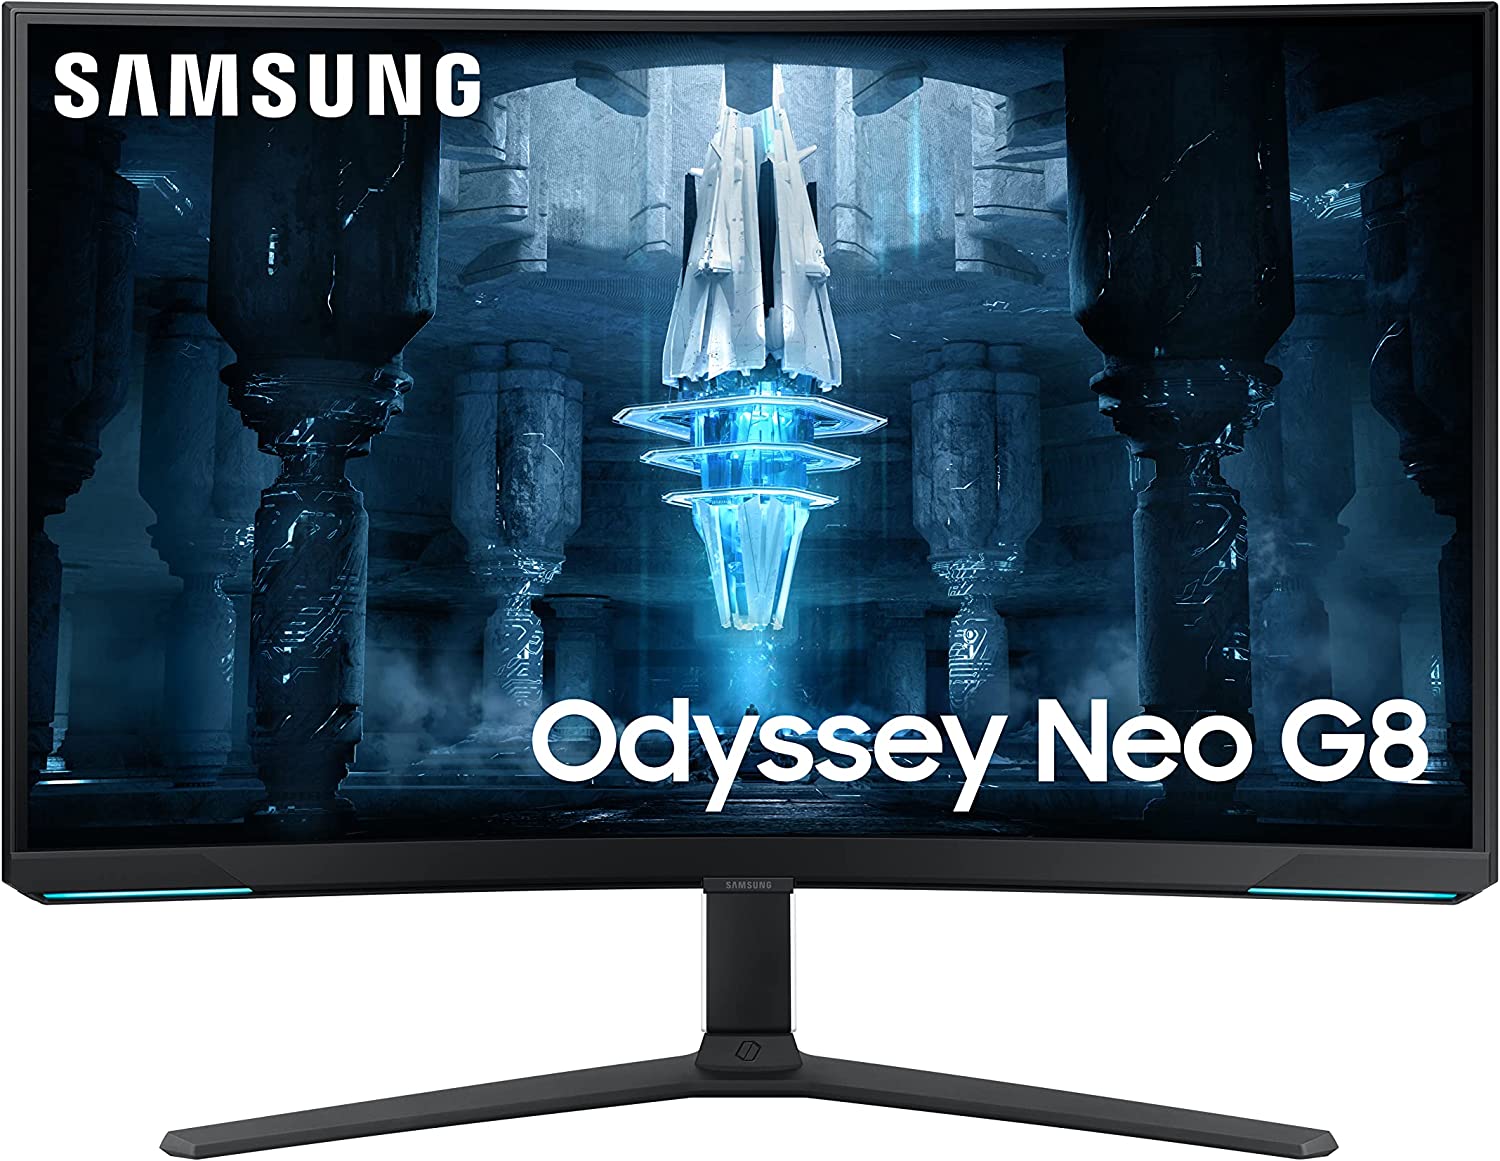 SAMSUNG 32 Odyssey Neo G8 4K UHD 240Hz 1ms G-Sync 1000R Curved Gaming Monitor, Quantum HDR2000, AMD FreeSync Premium Pro, Matte Display, Ultrawide Game